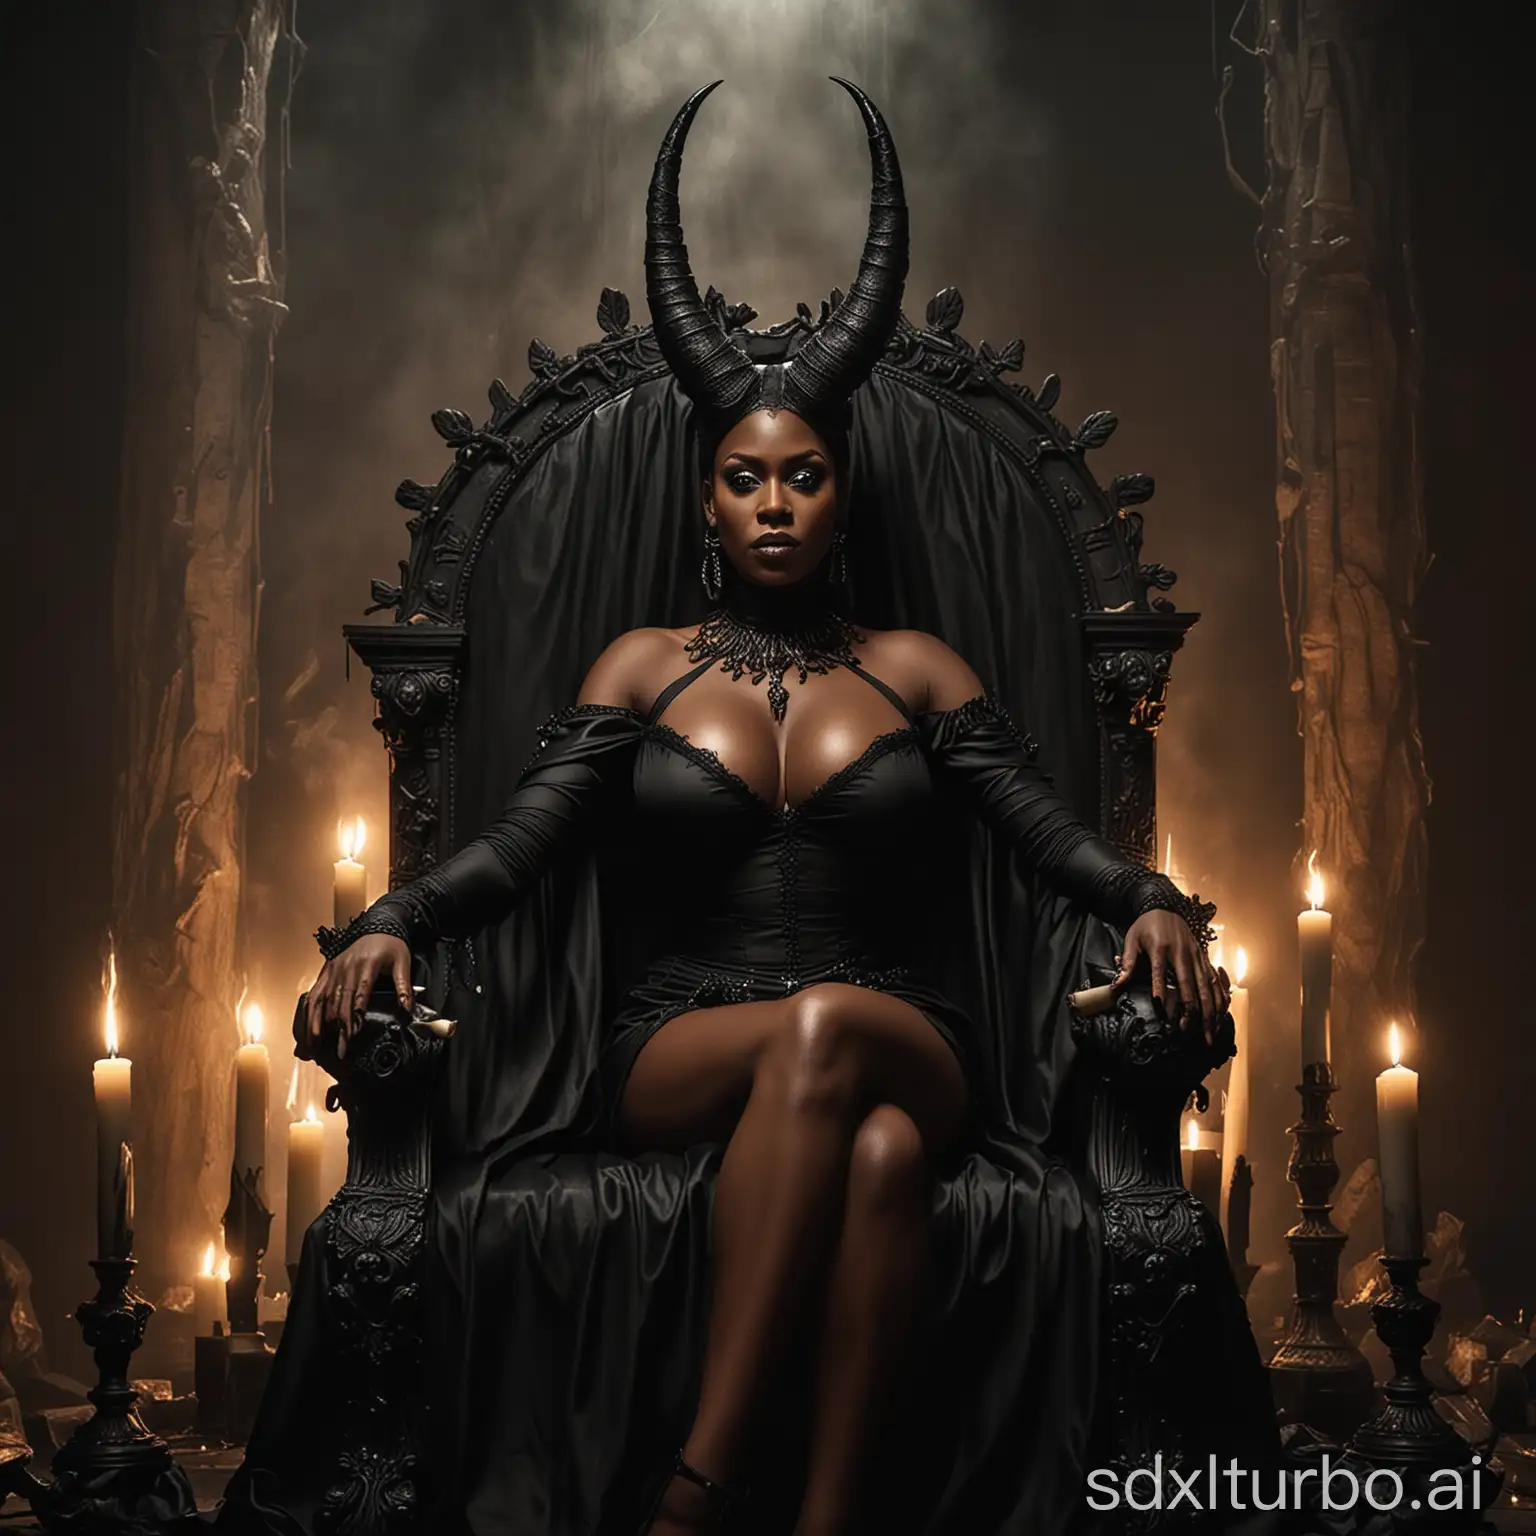 an imposing black woman  with horns on her imposing forehead ,big breasts ,elegantly on a luxurious black throne.  and she exudes an air of authority. She wears a striking black outfit, complete with high-necked black cape and high heels, further accentuating her majestic presence. Two skulls with burning black candles on top rest ominously on either side of it, casting a mysterious yet fascinating shadow. The atmosphere is enchanting, evoking feelings of ancient wisdom, power and mystique